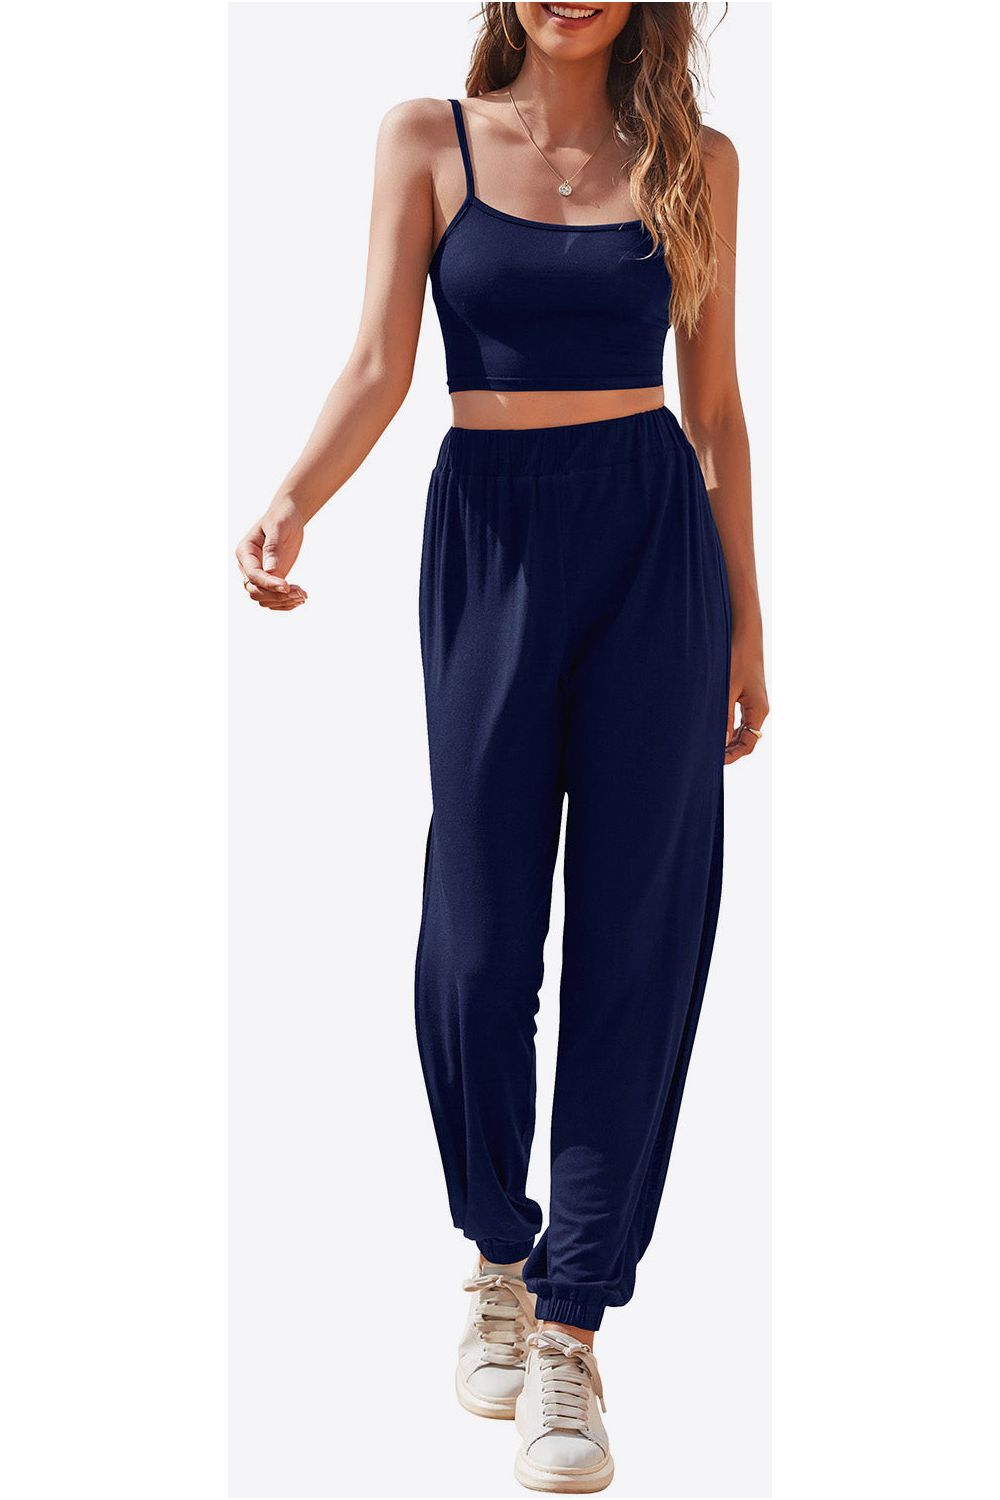 Women Cropped Cami and Side Split Joggers Set